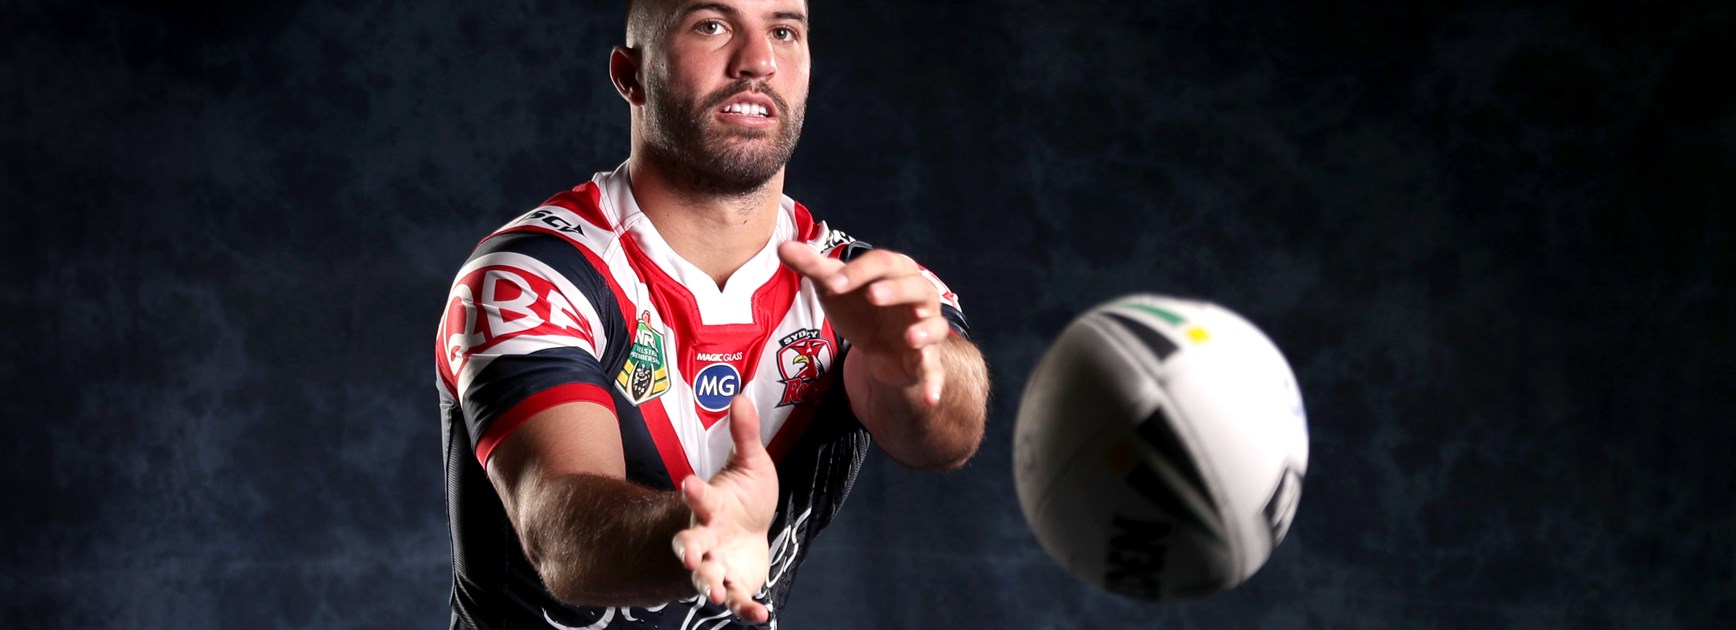 No panic at Tedesco despite slow start at Roosters